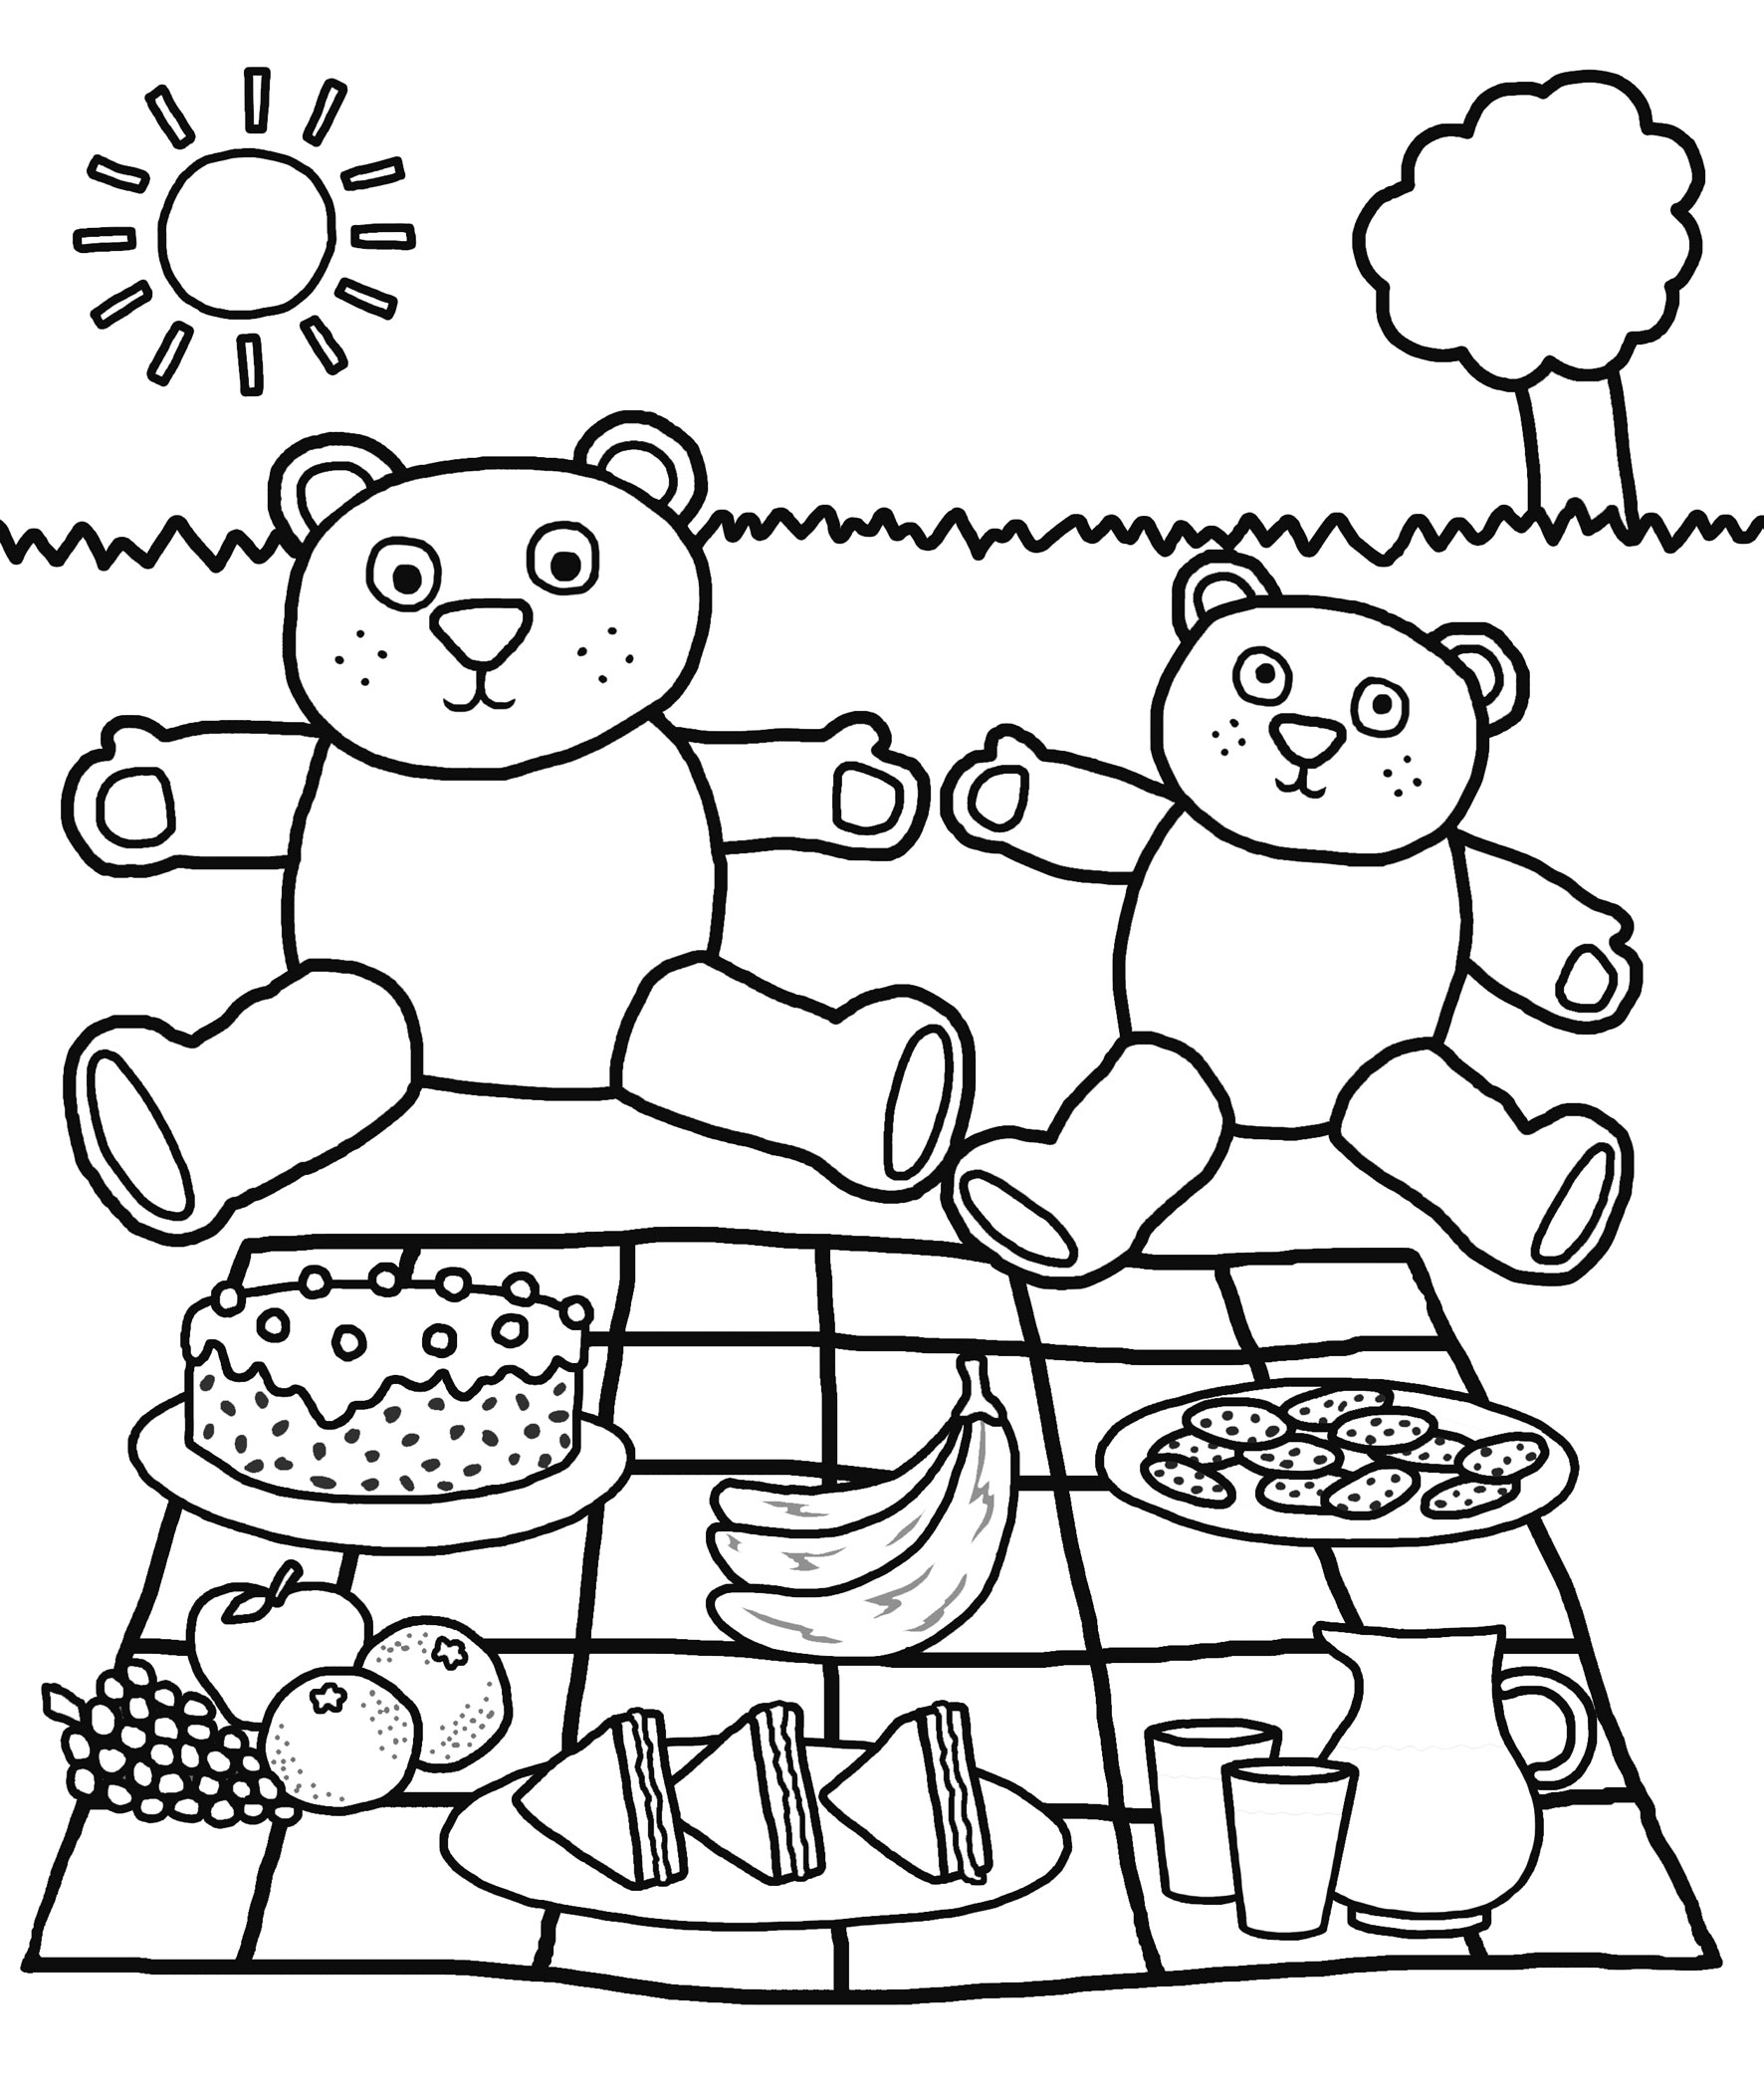 Picnic coloring, Download Picnic coloring for free 2019